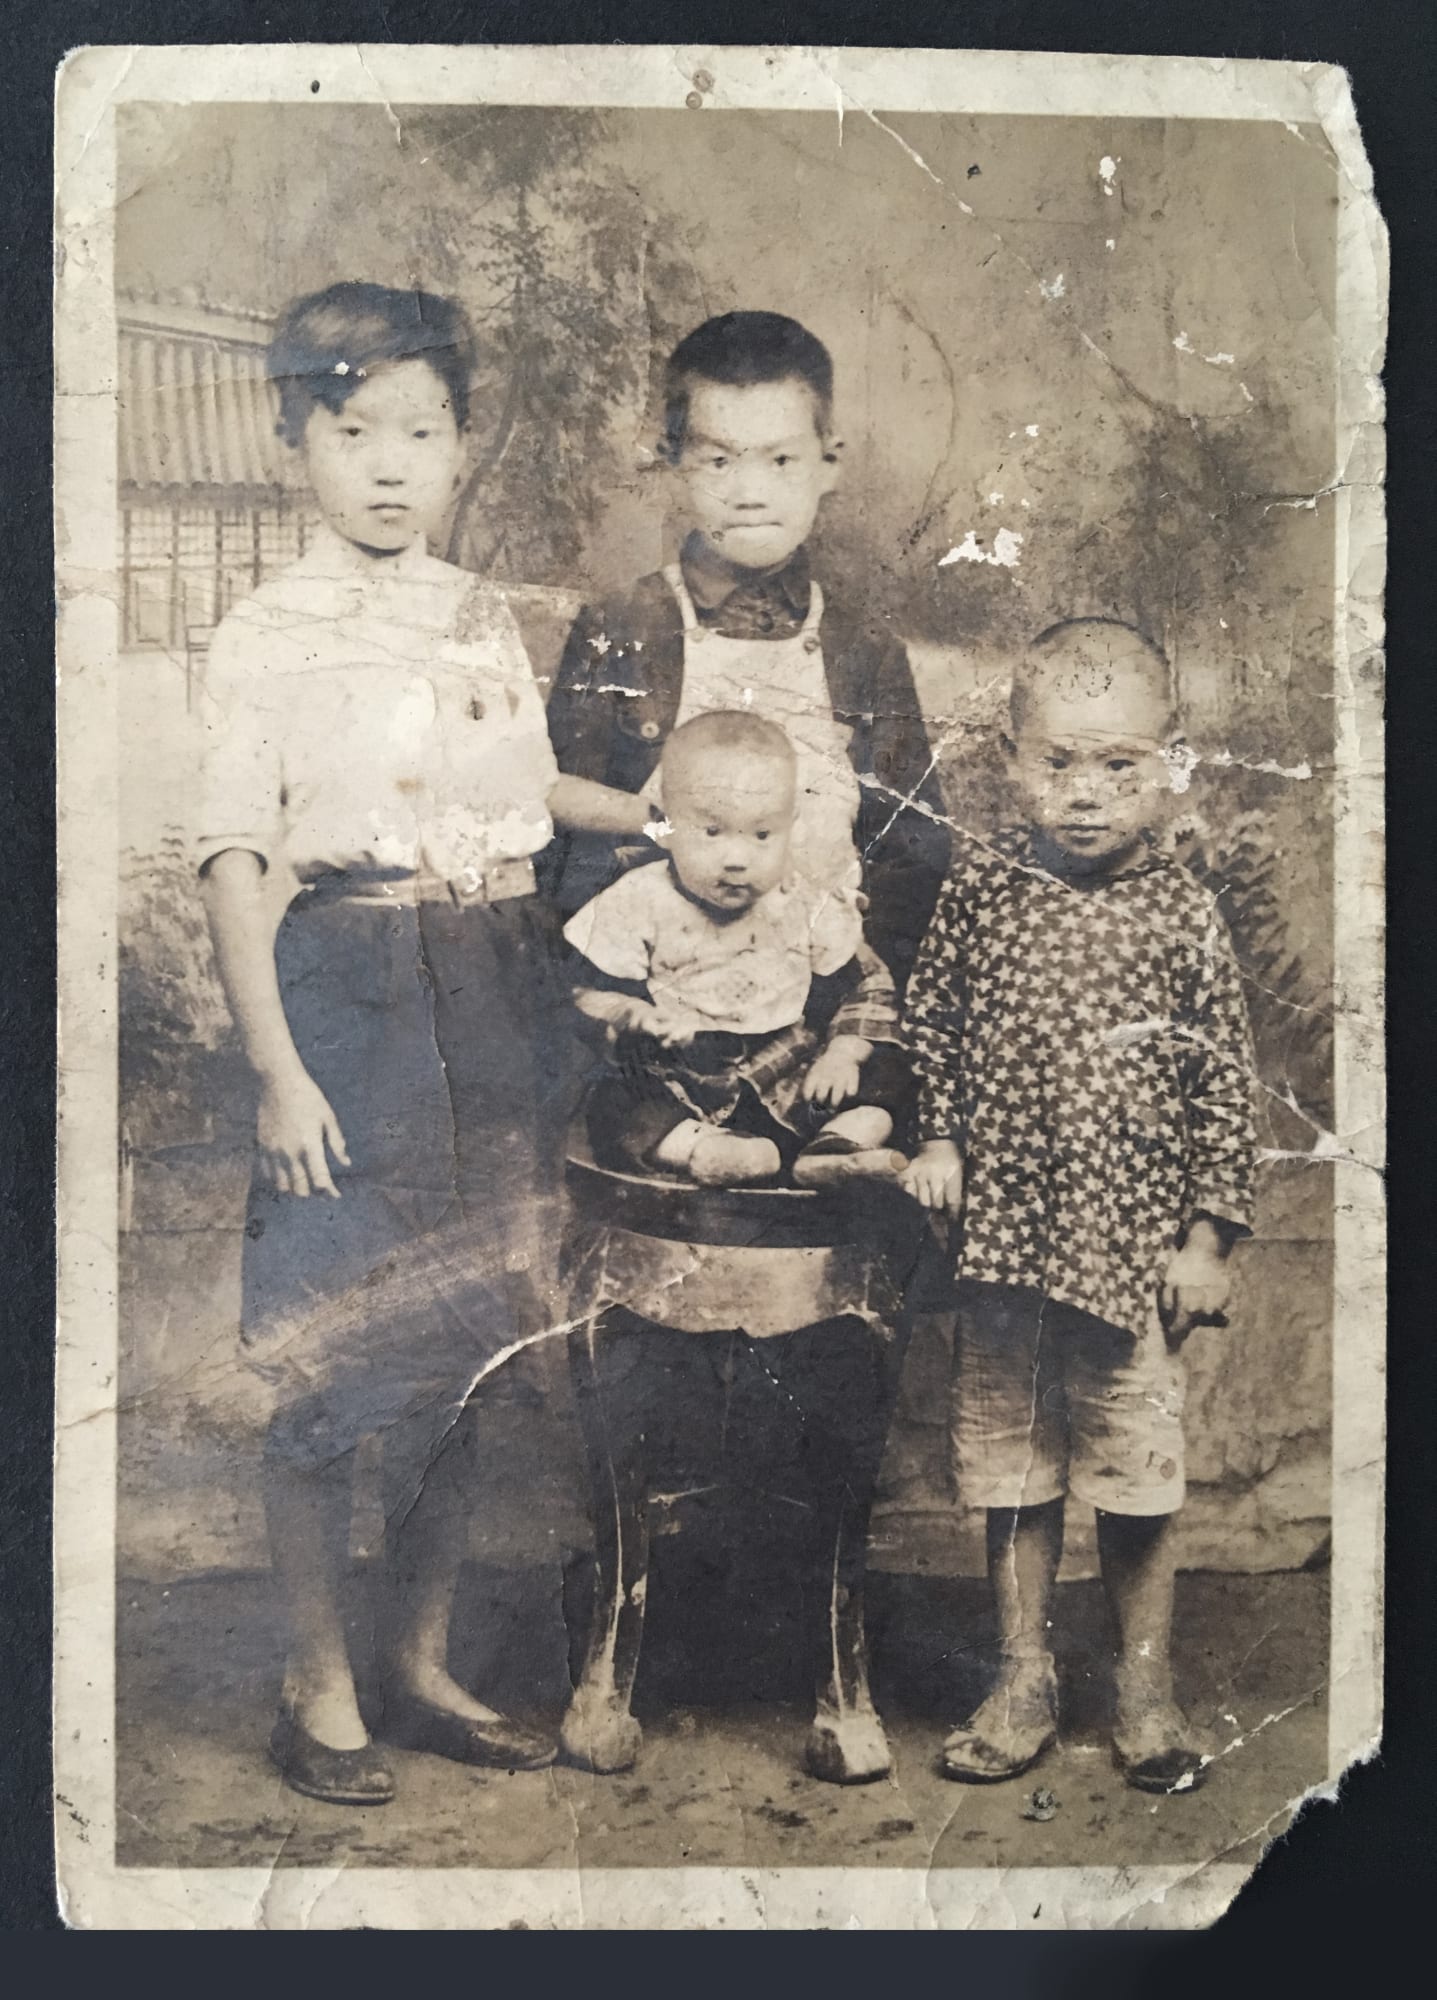 Photograph circa 1940, Olivia Jia's grandmother and her siblings